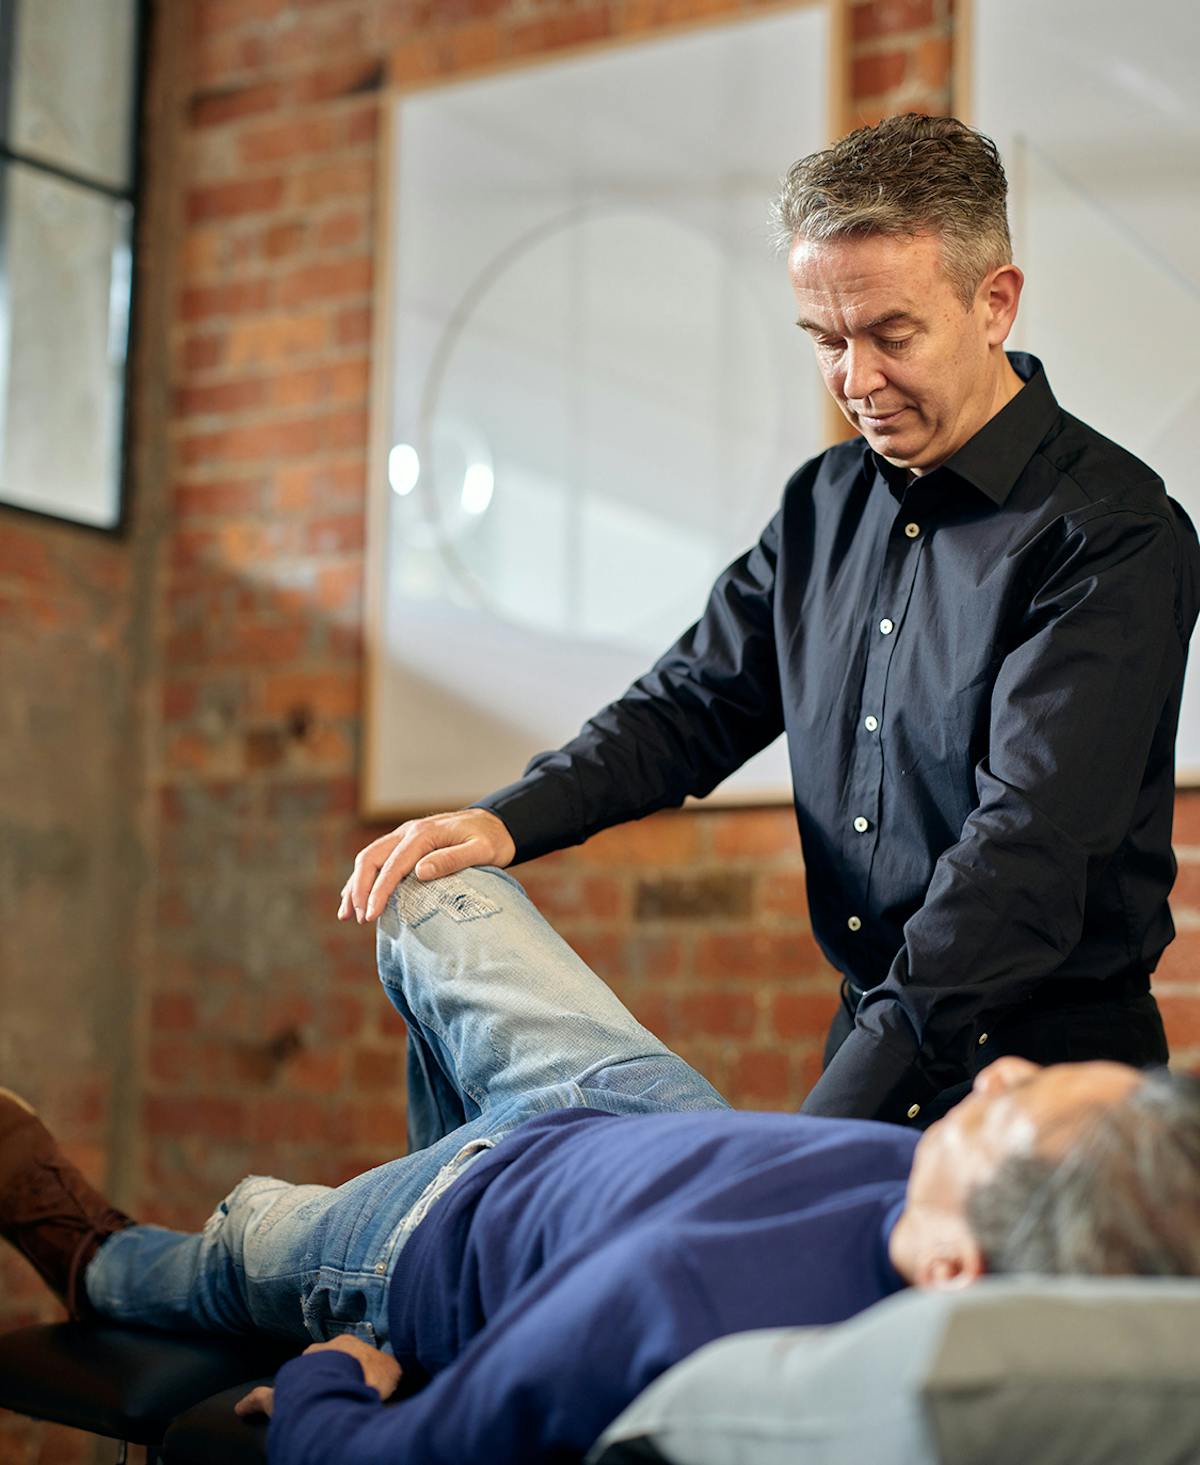 ostepathy for lower back pain demonstration